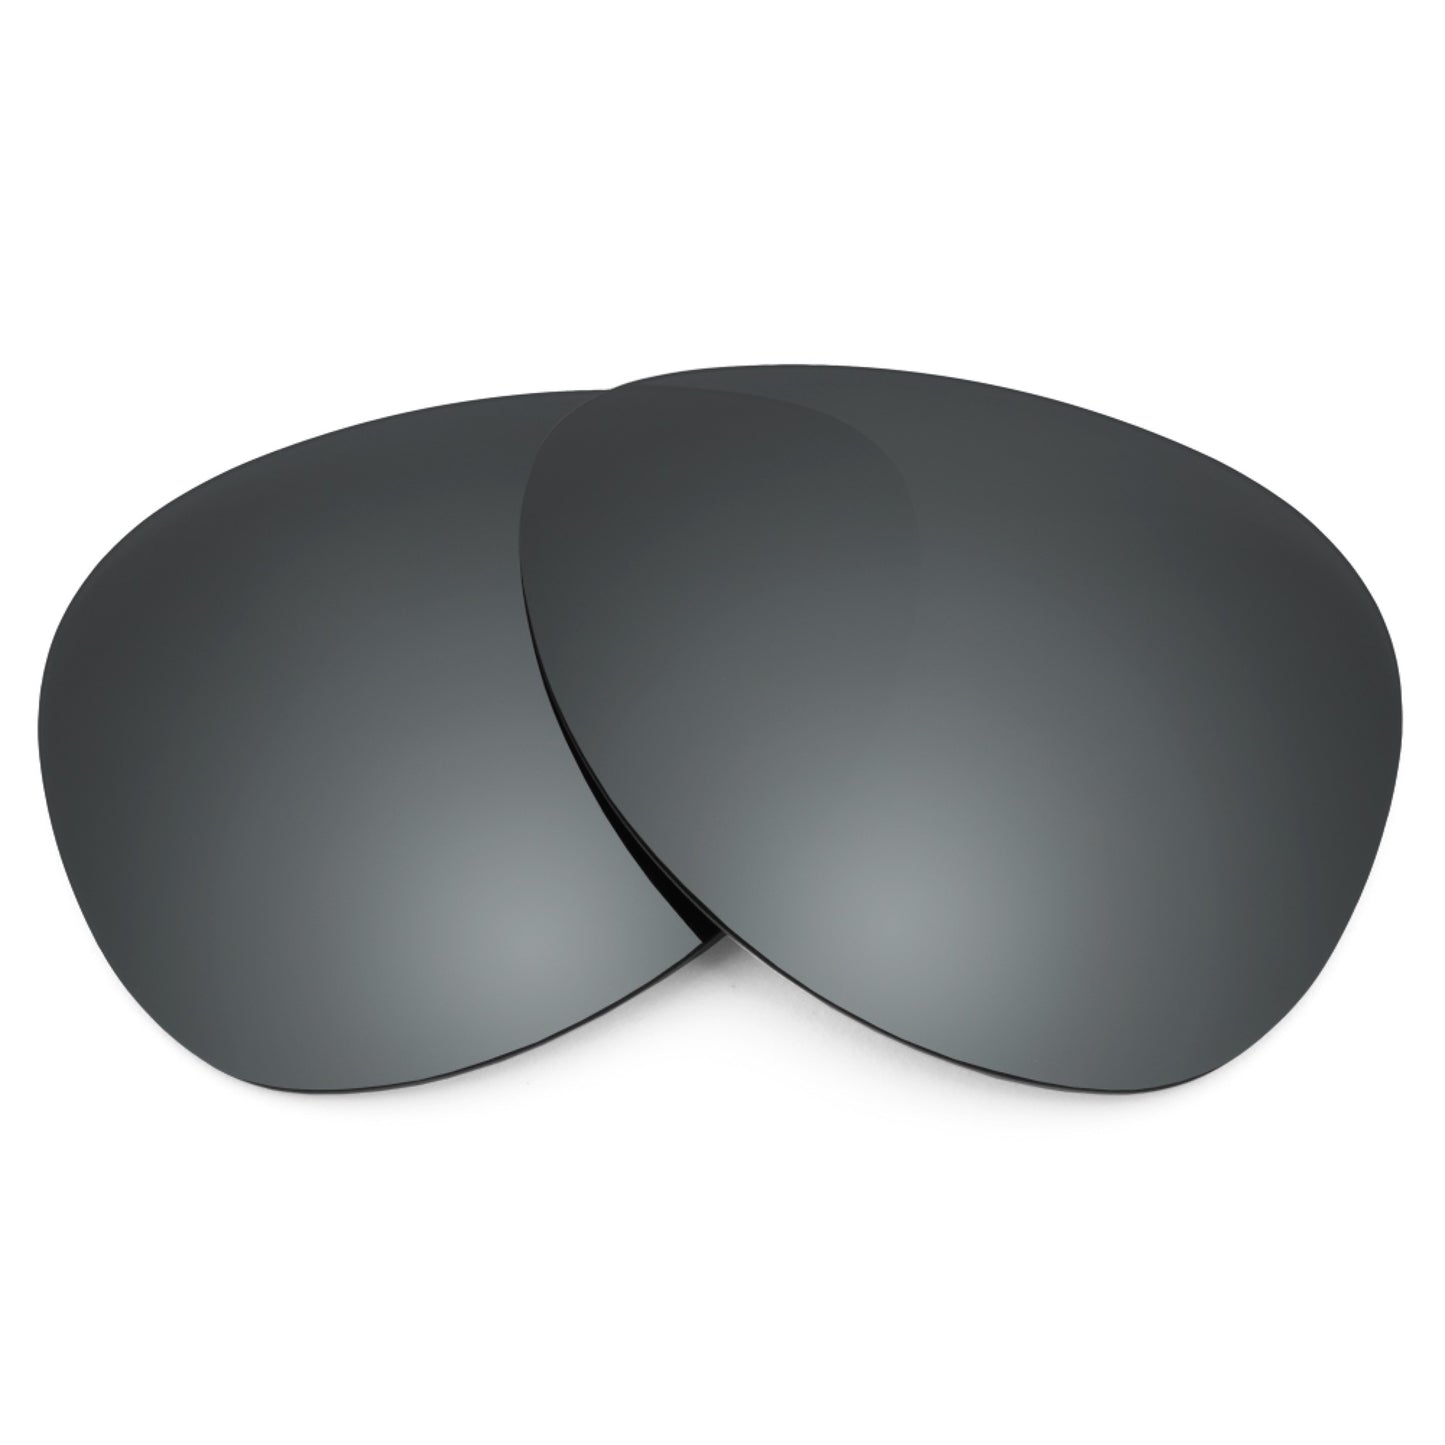 Revant replacement lenses for Ray-Ban Jackie Ohh RB4101 58mm Elite Polarized Black Chrome